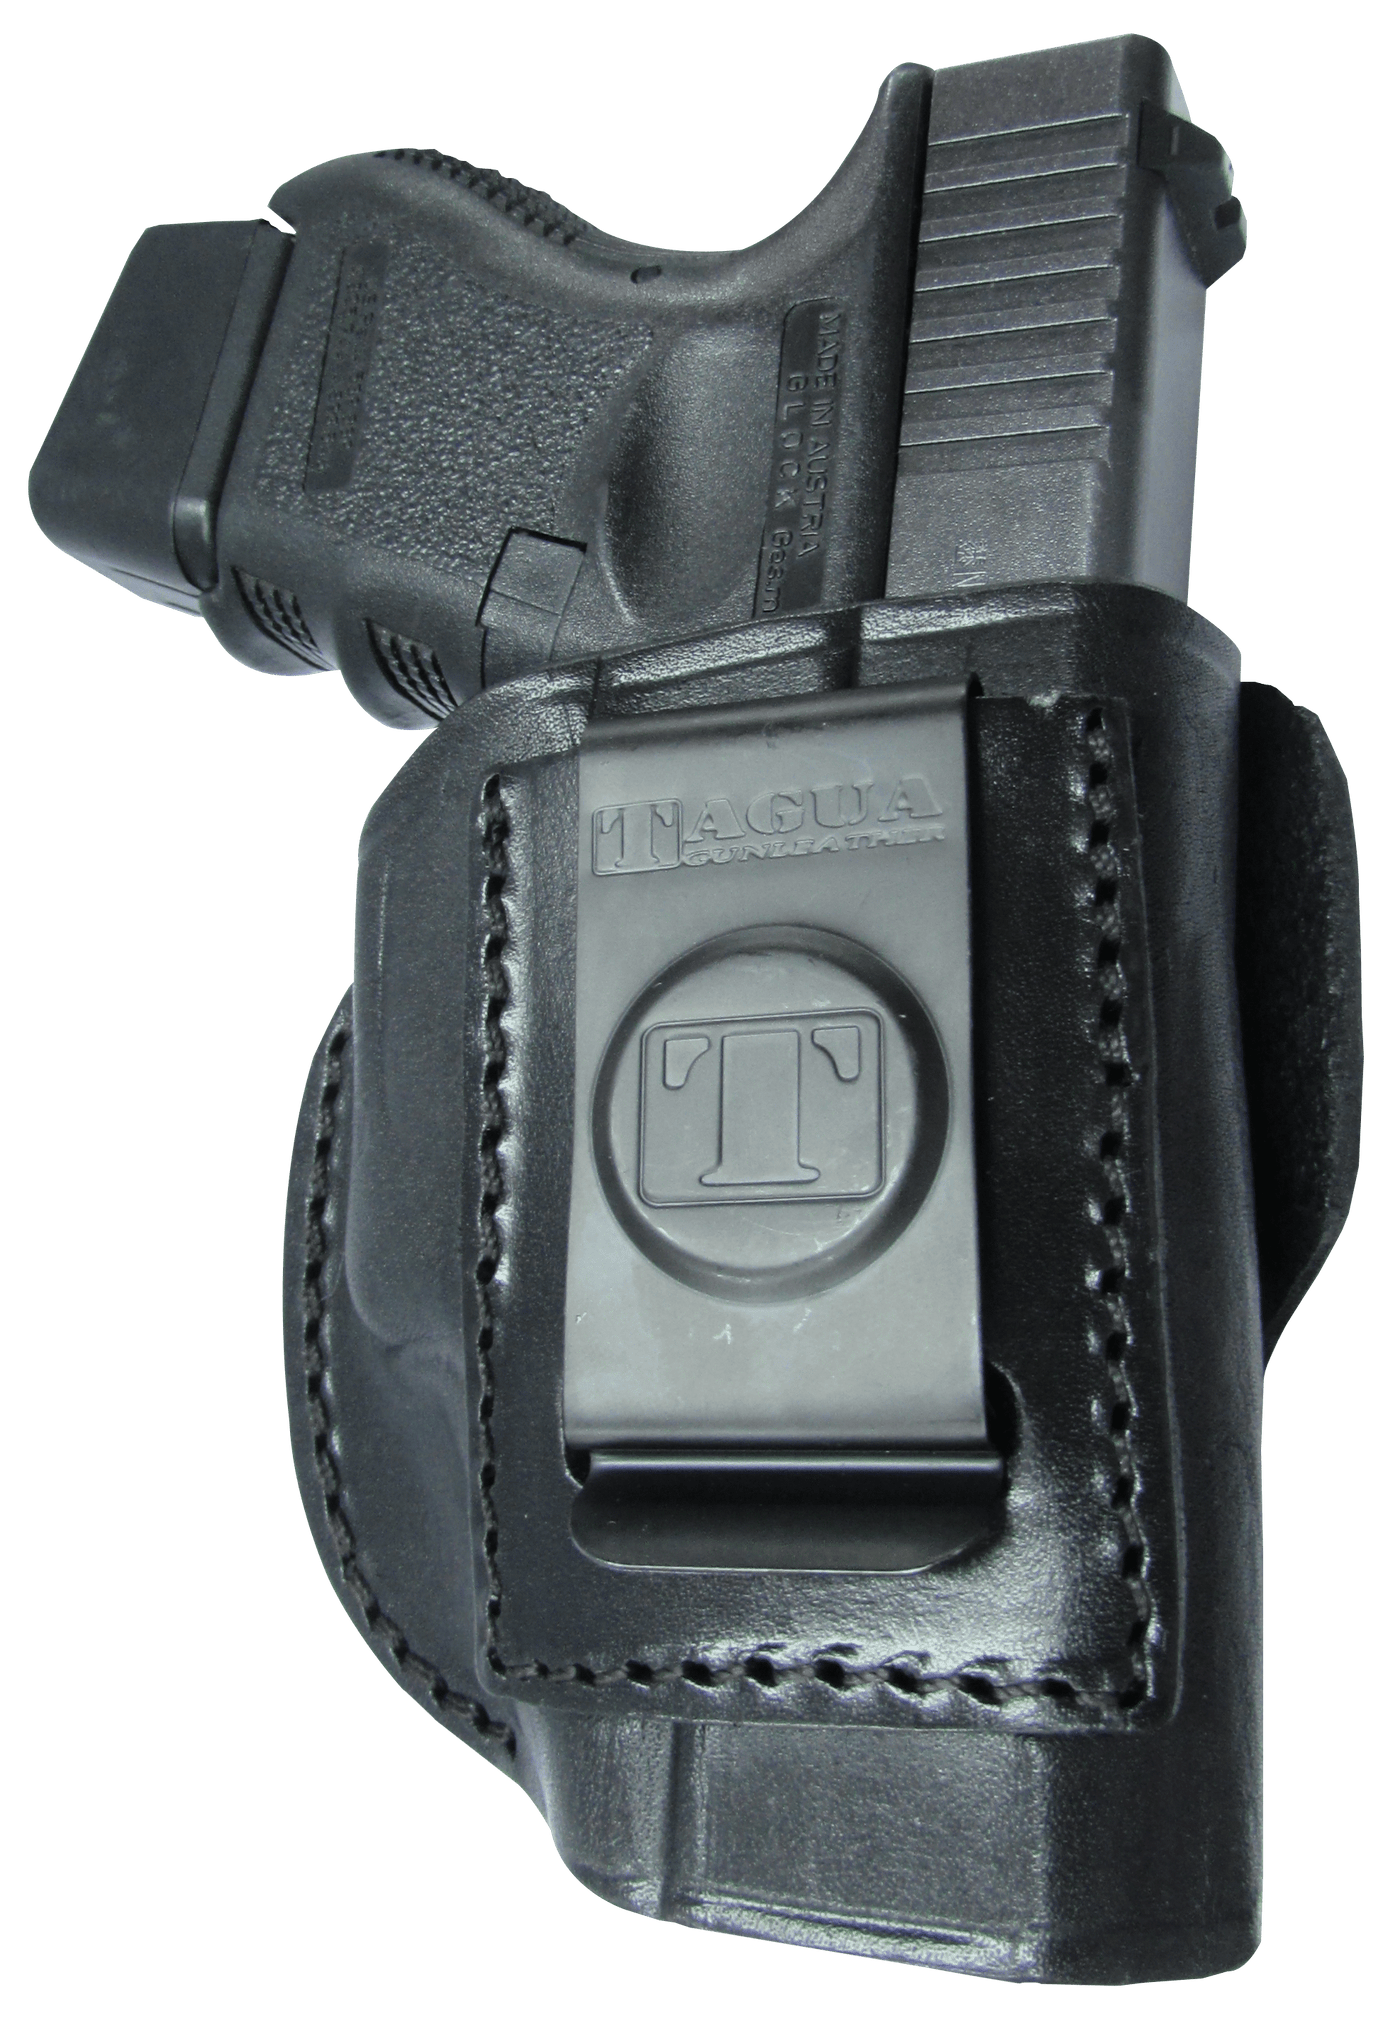 Tagua Tagua 4 In 1 Inside The Pant - Holster S&w Shield 9/40 Blk Rh Holsters And Related Items